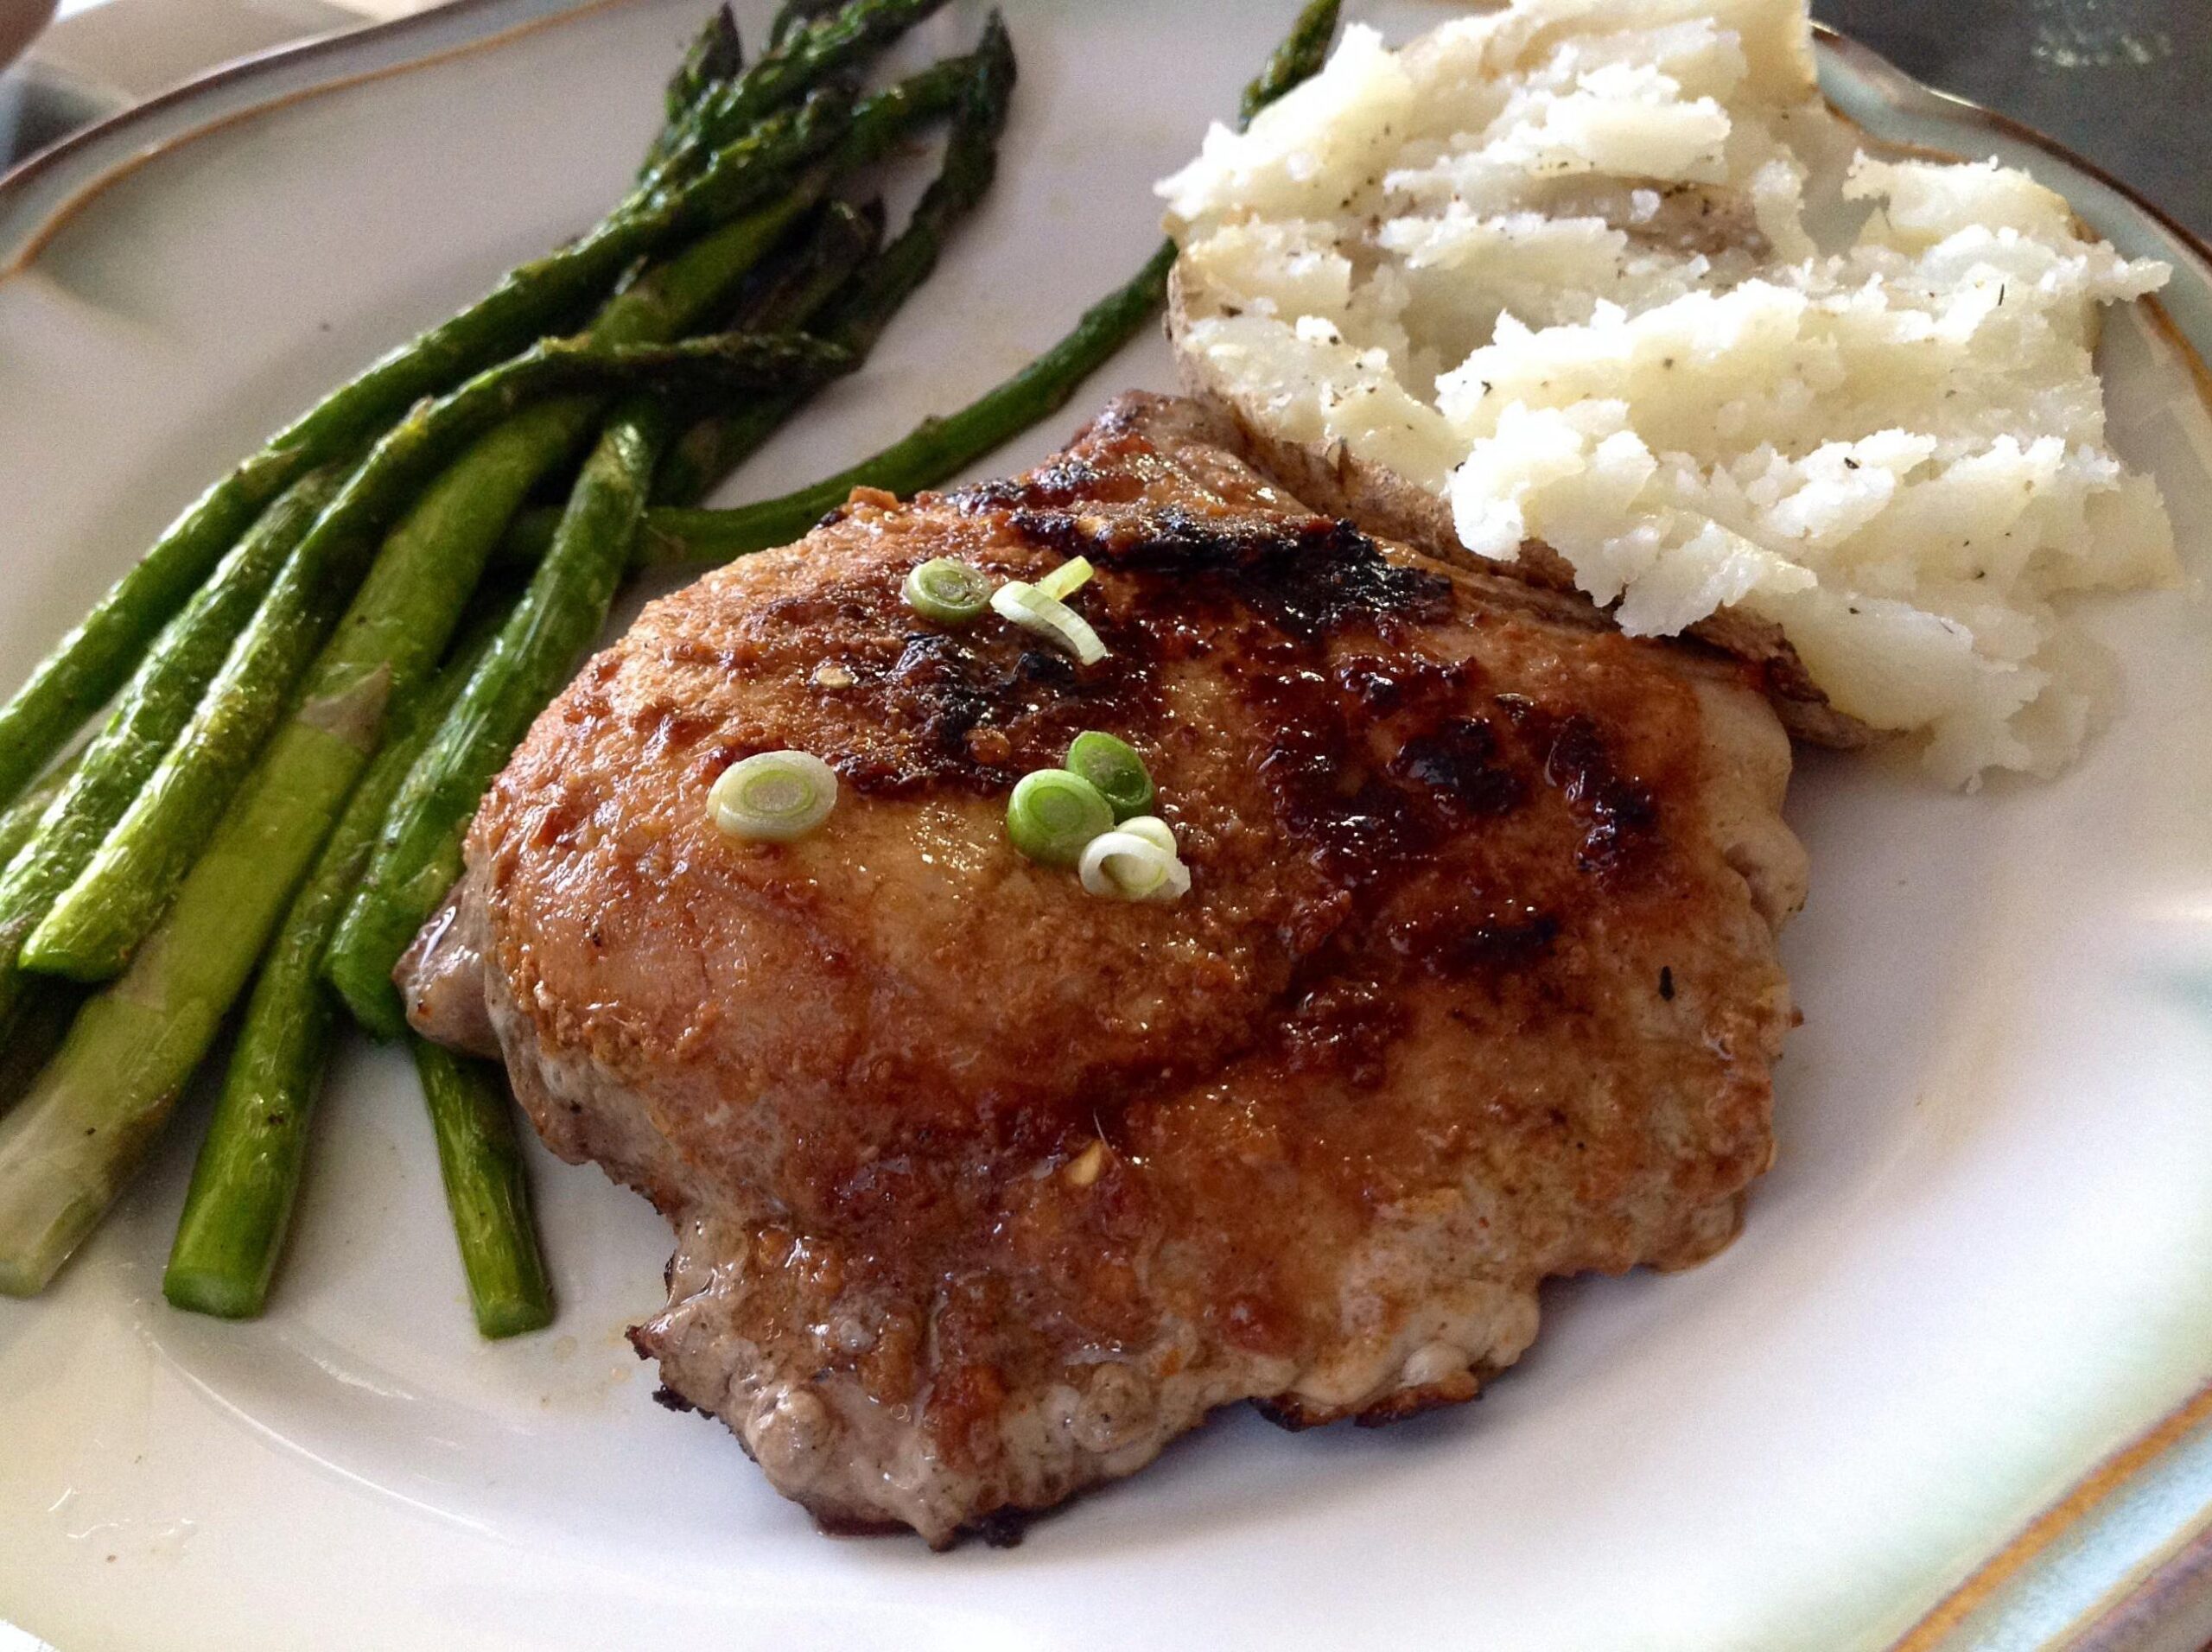  Spice up your weeknight dinner routine with these mouthwatering pork chops.